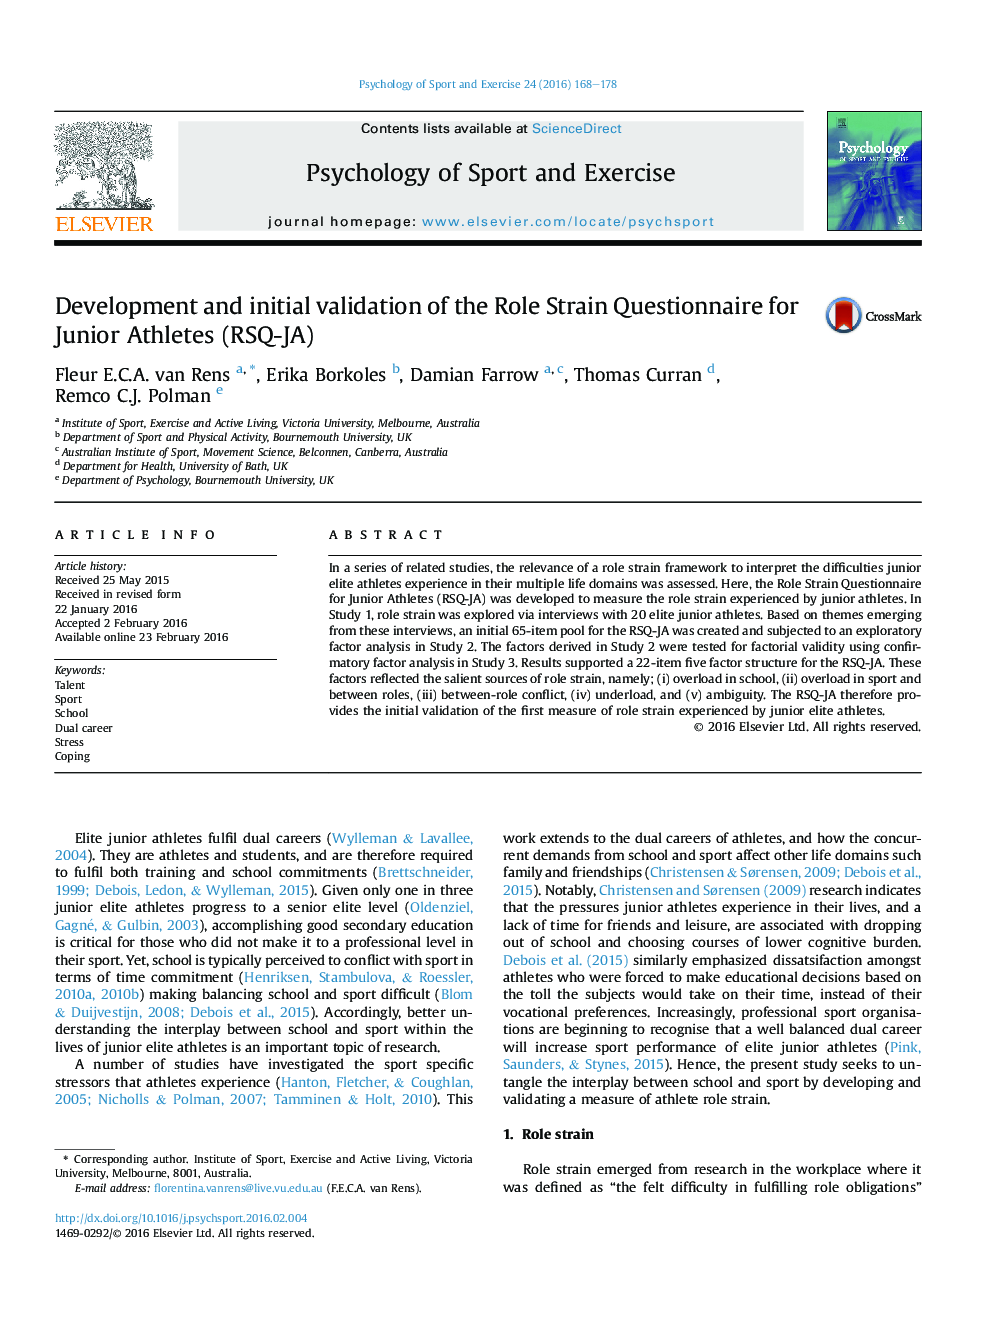 Development and initial validation of the Role Strain Questionnaire for Junior Athletes (RSQ-JA)